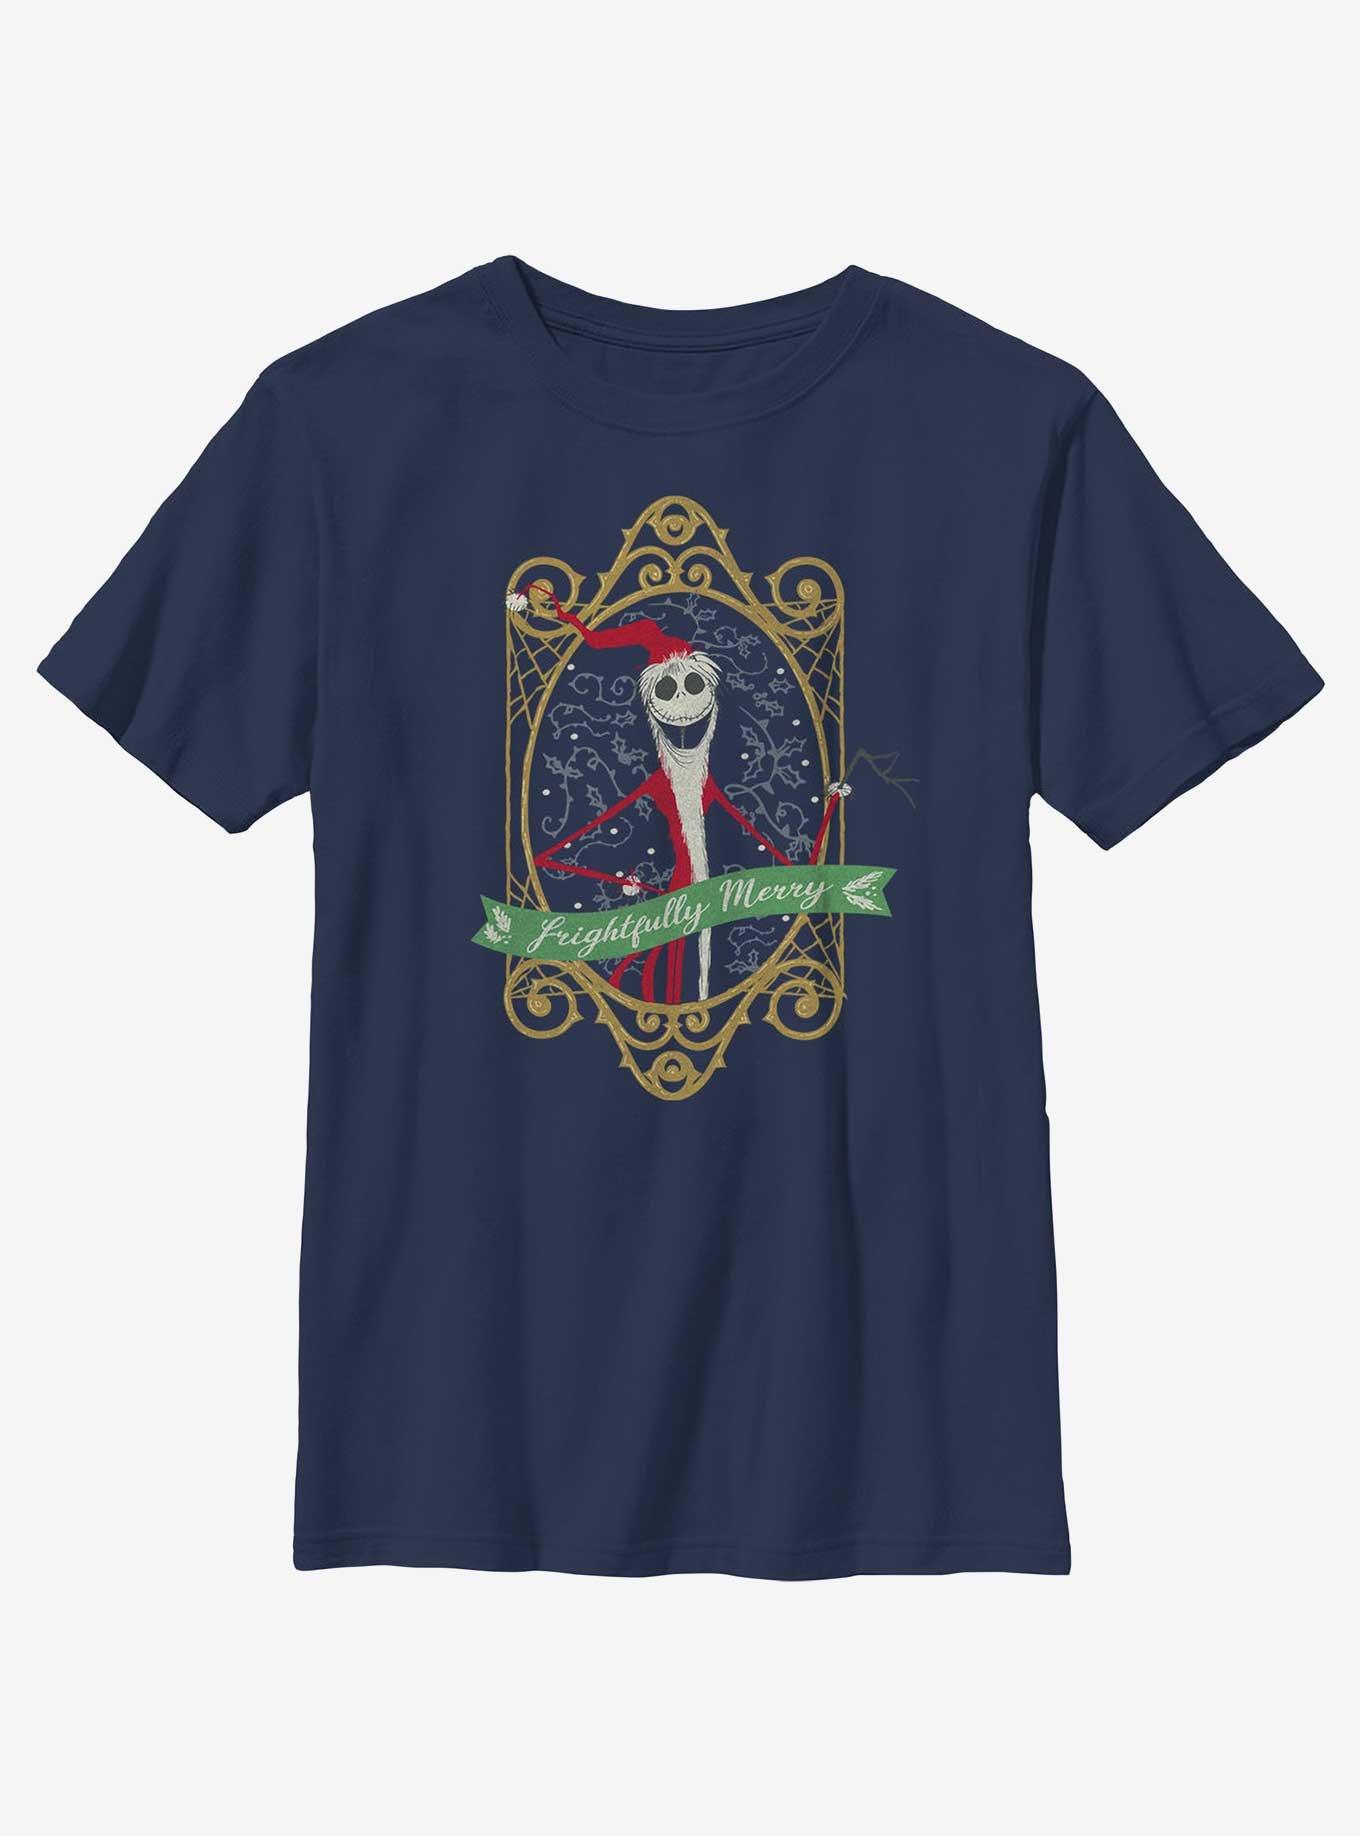 Disney Nightmare Before Christmas Frightfully Merry Youth T-Shirt, NAVY, hi-res